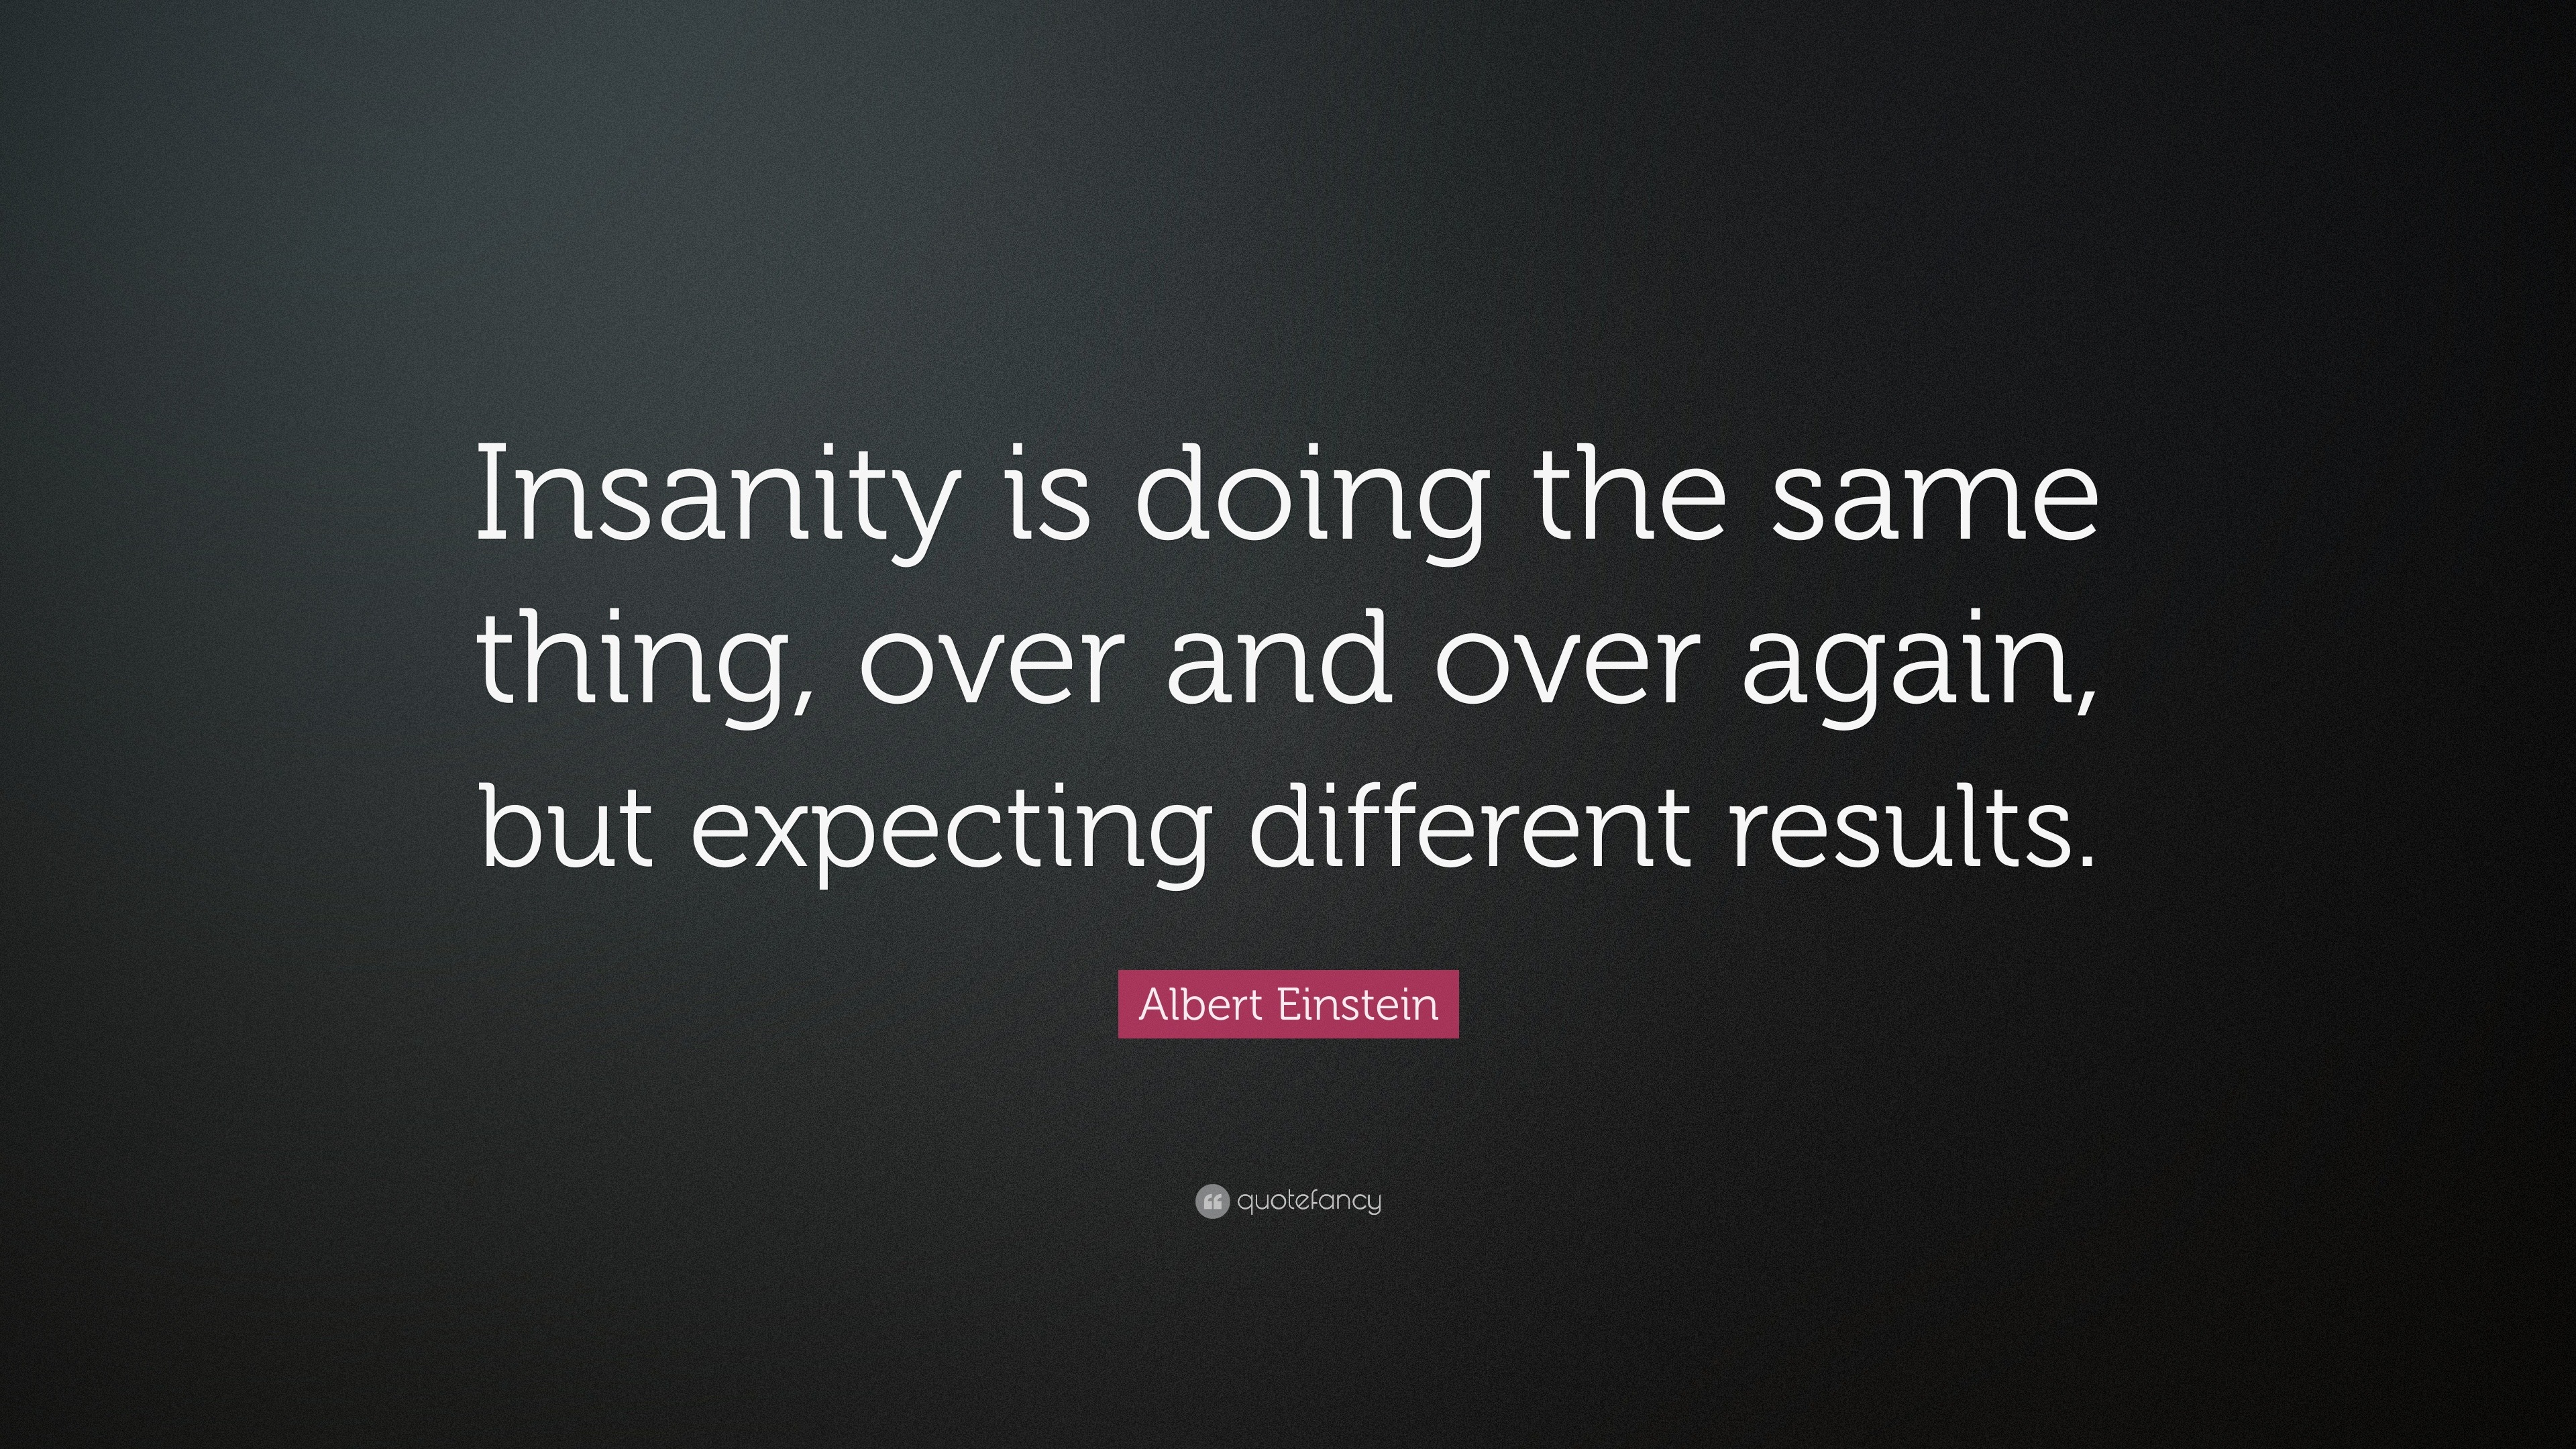 25562-Albert-Einstein-Quote-Insanity-is-doing-the-same-thing-over-and.jpg